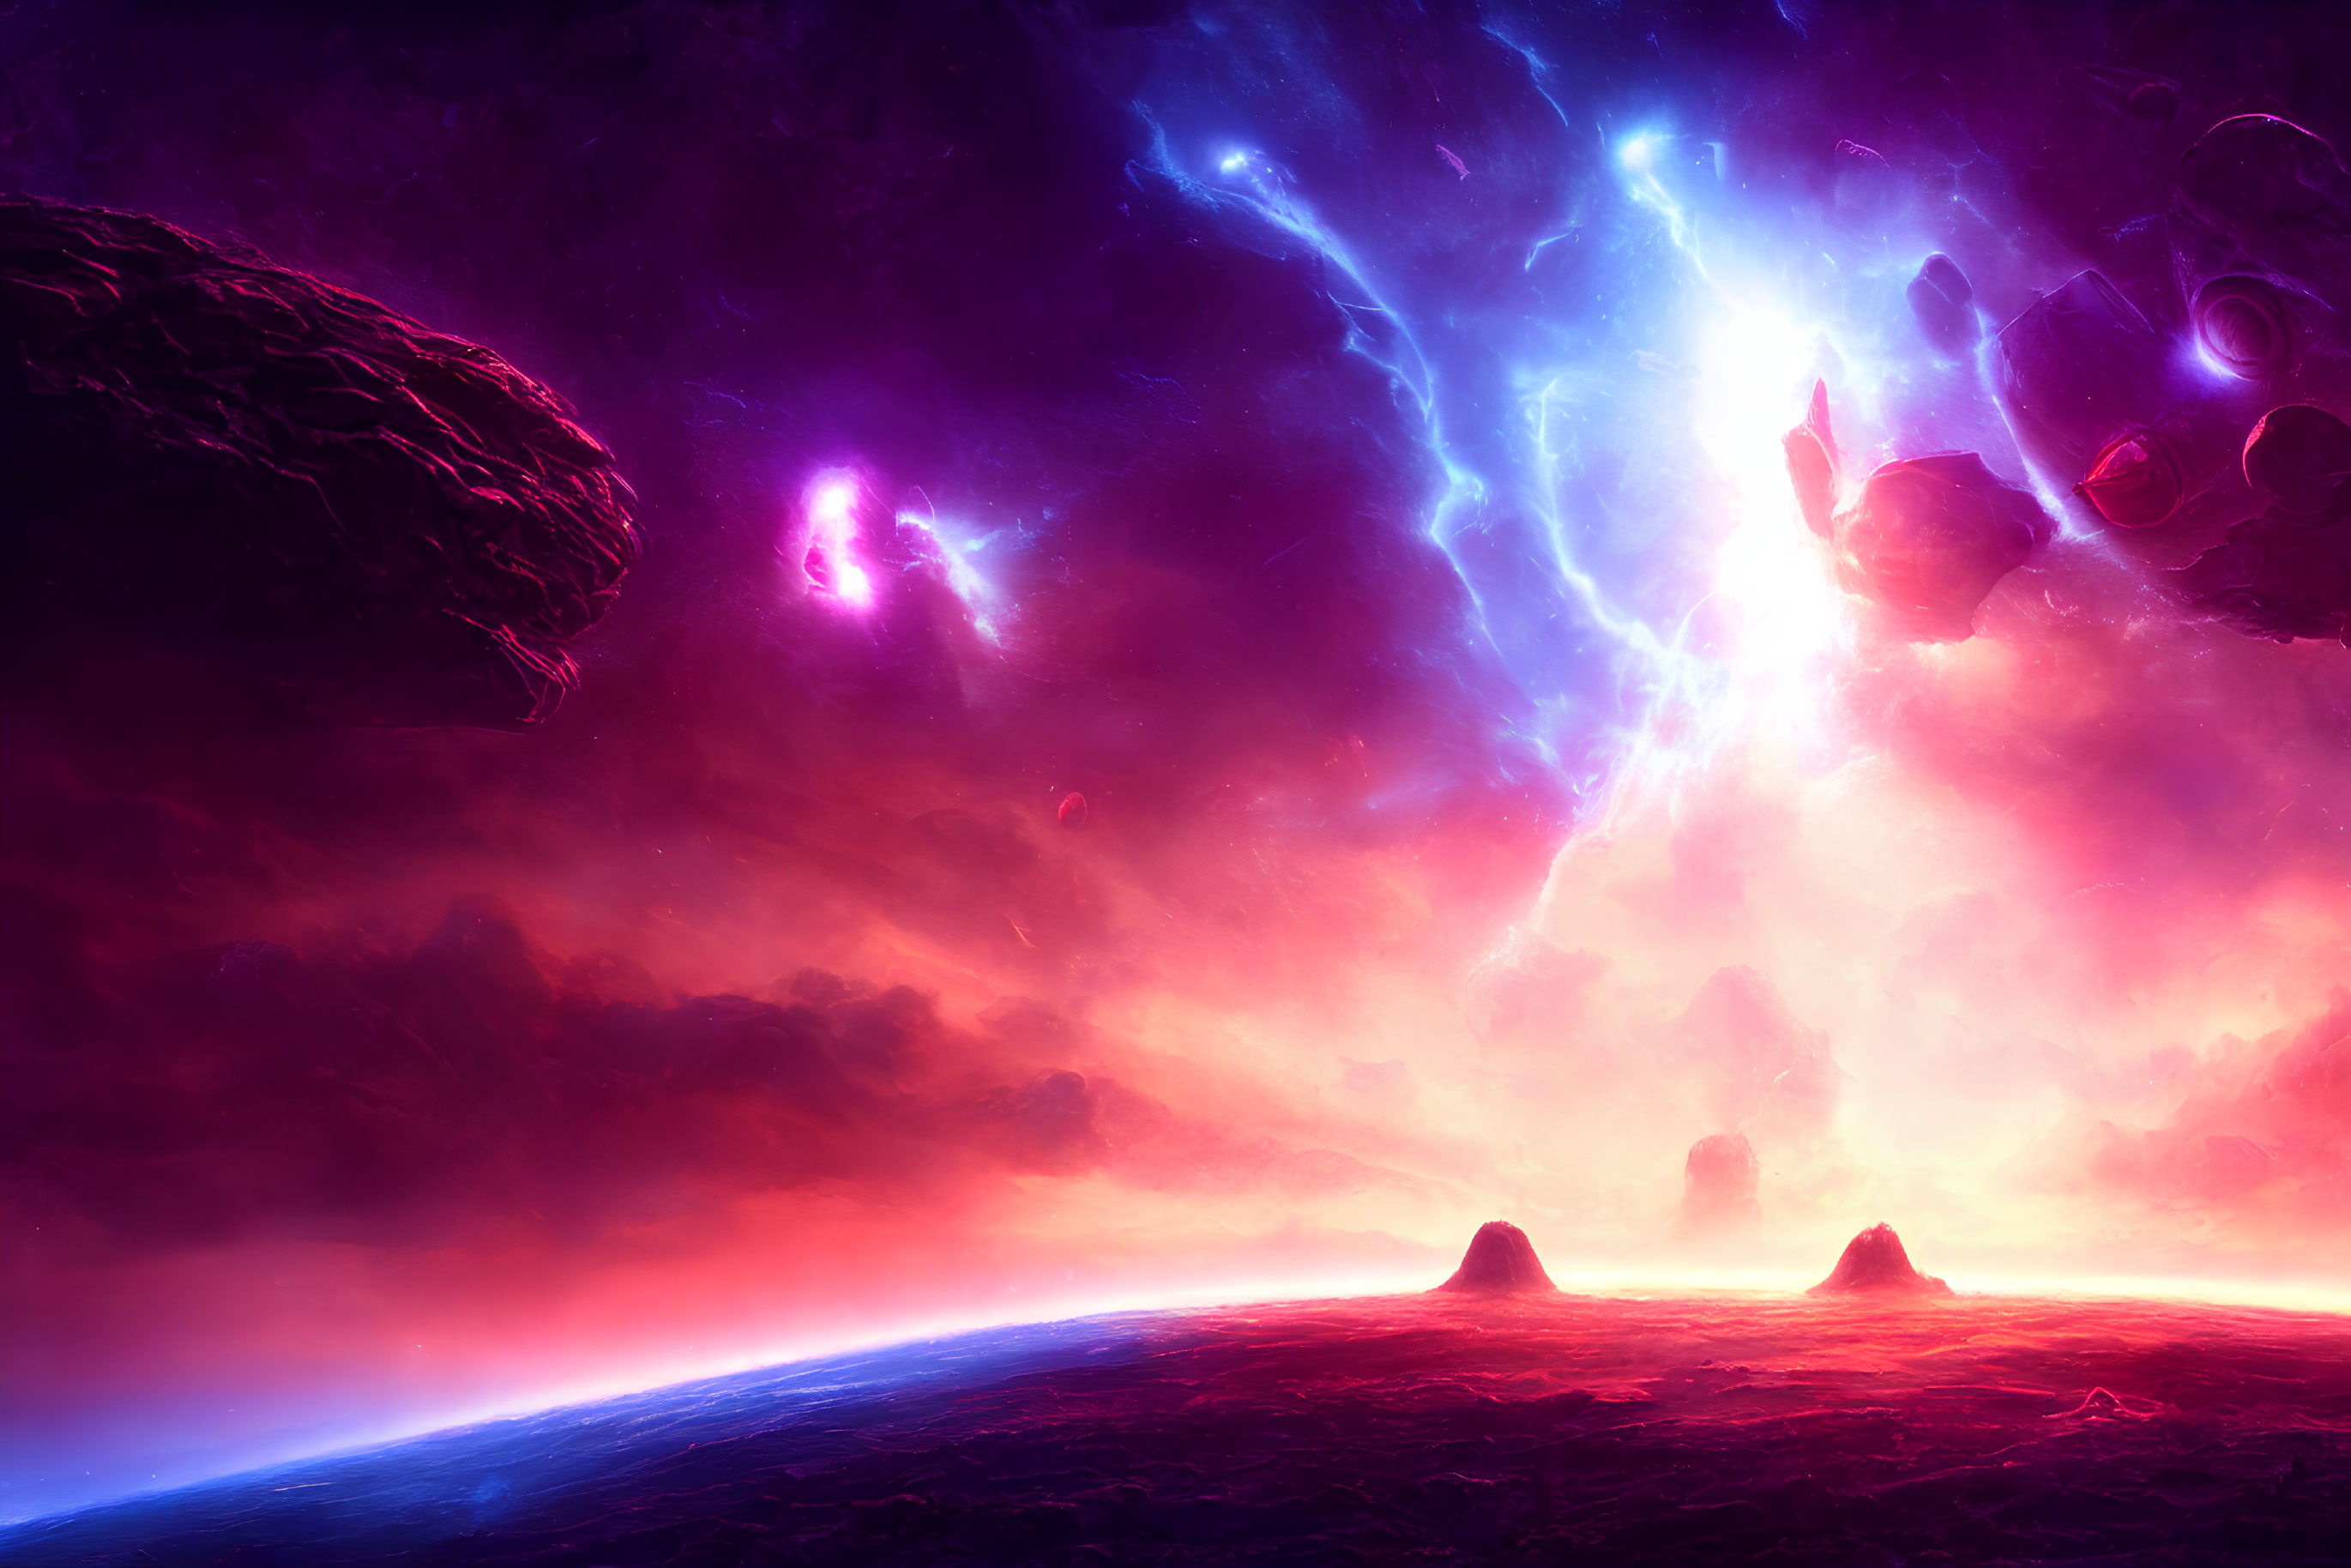 Vibrant cosmic scene with purple and pink nebula, lightning, asteroids, and alien planet surface